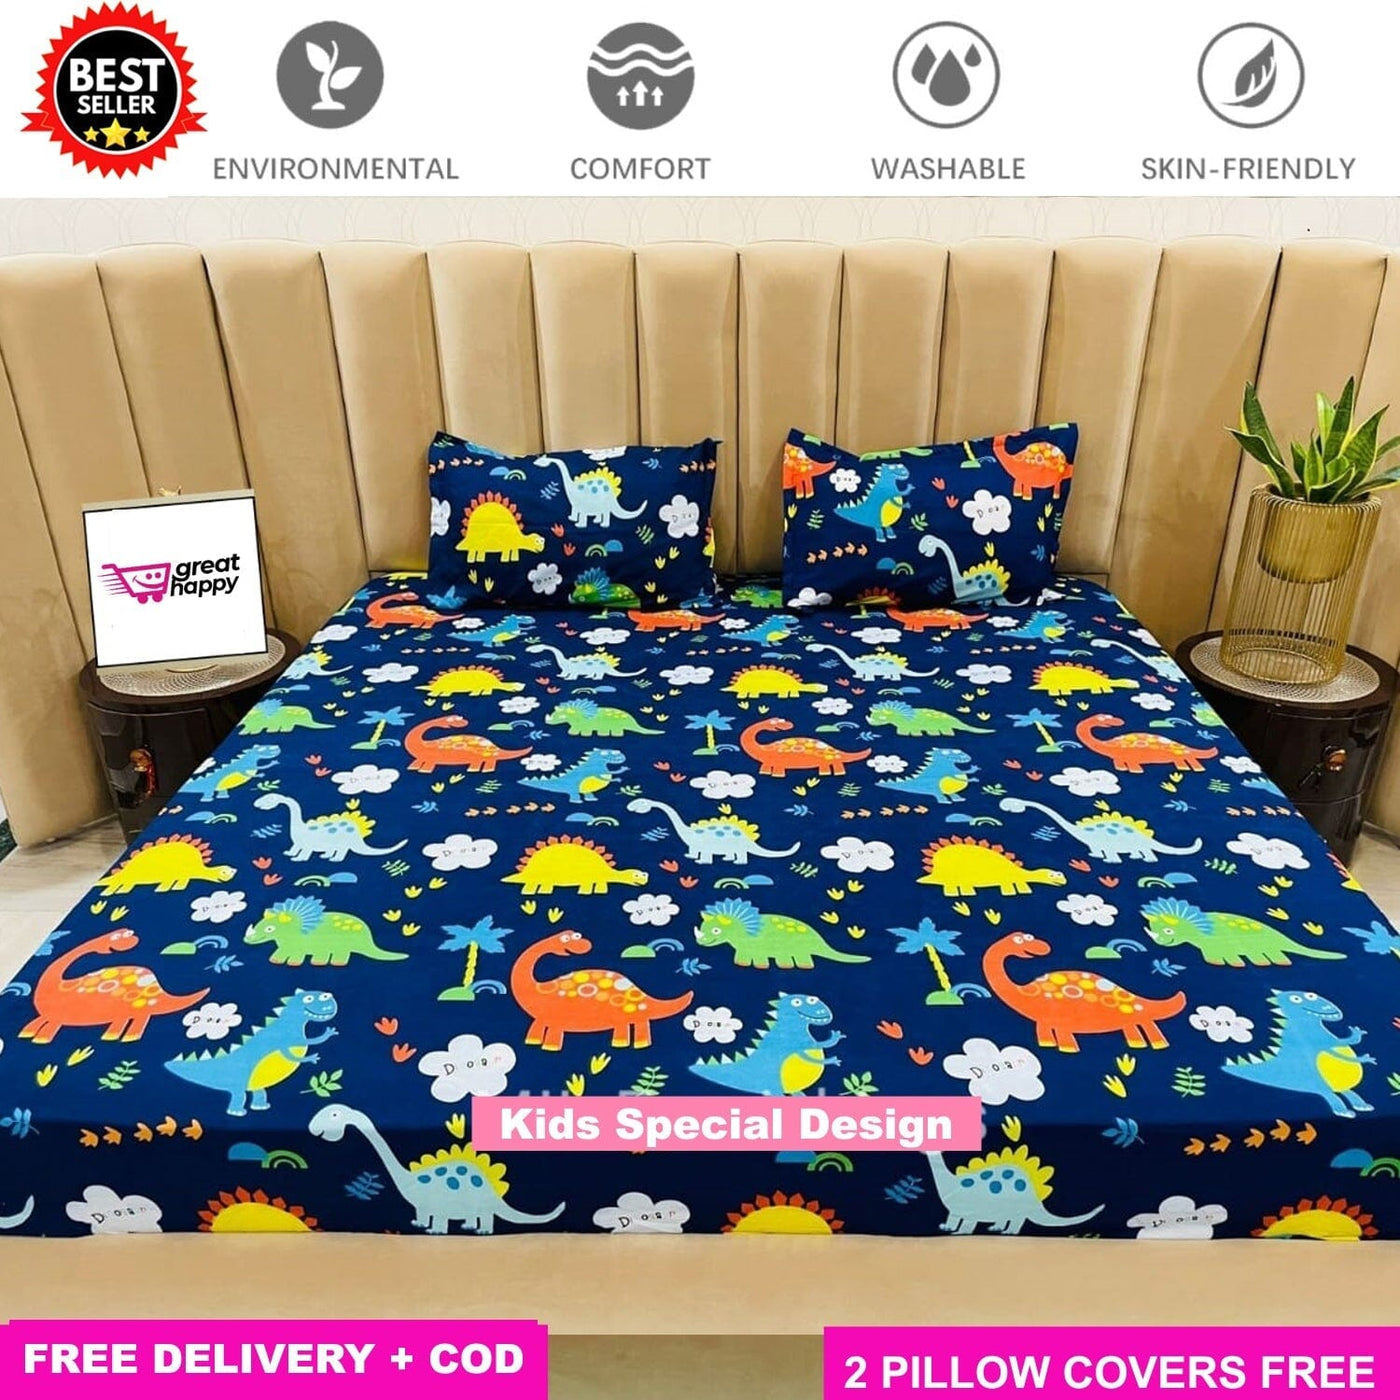 Kids Dragon Full Elastic Fitted Bedsheet with 2 Pillow Covers Bed Sheets Great Happy IN KING SIZE - ₹1299 